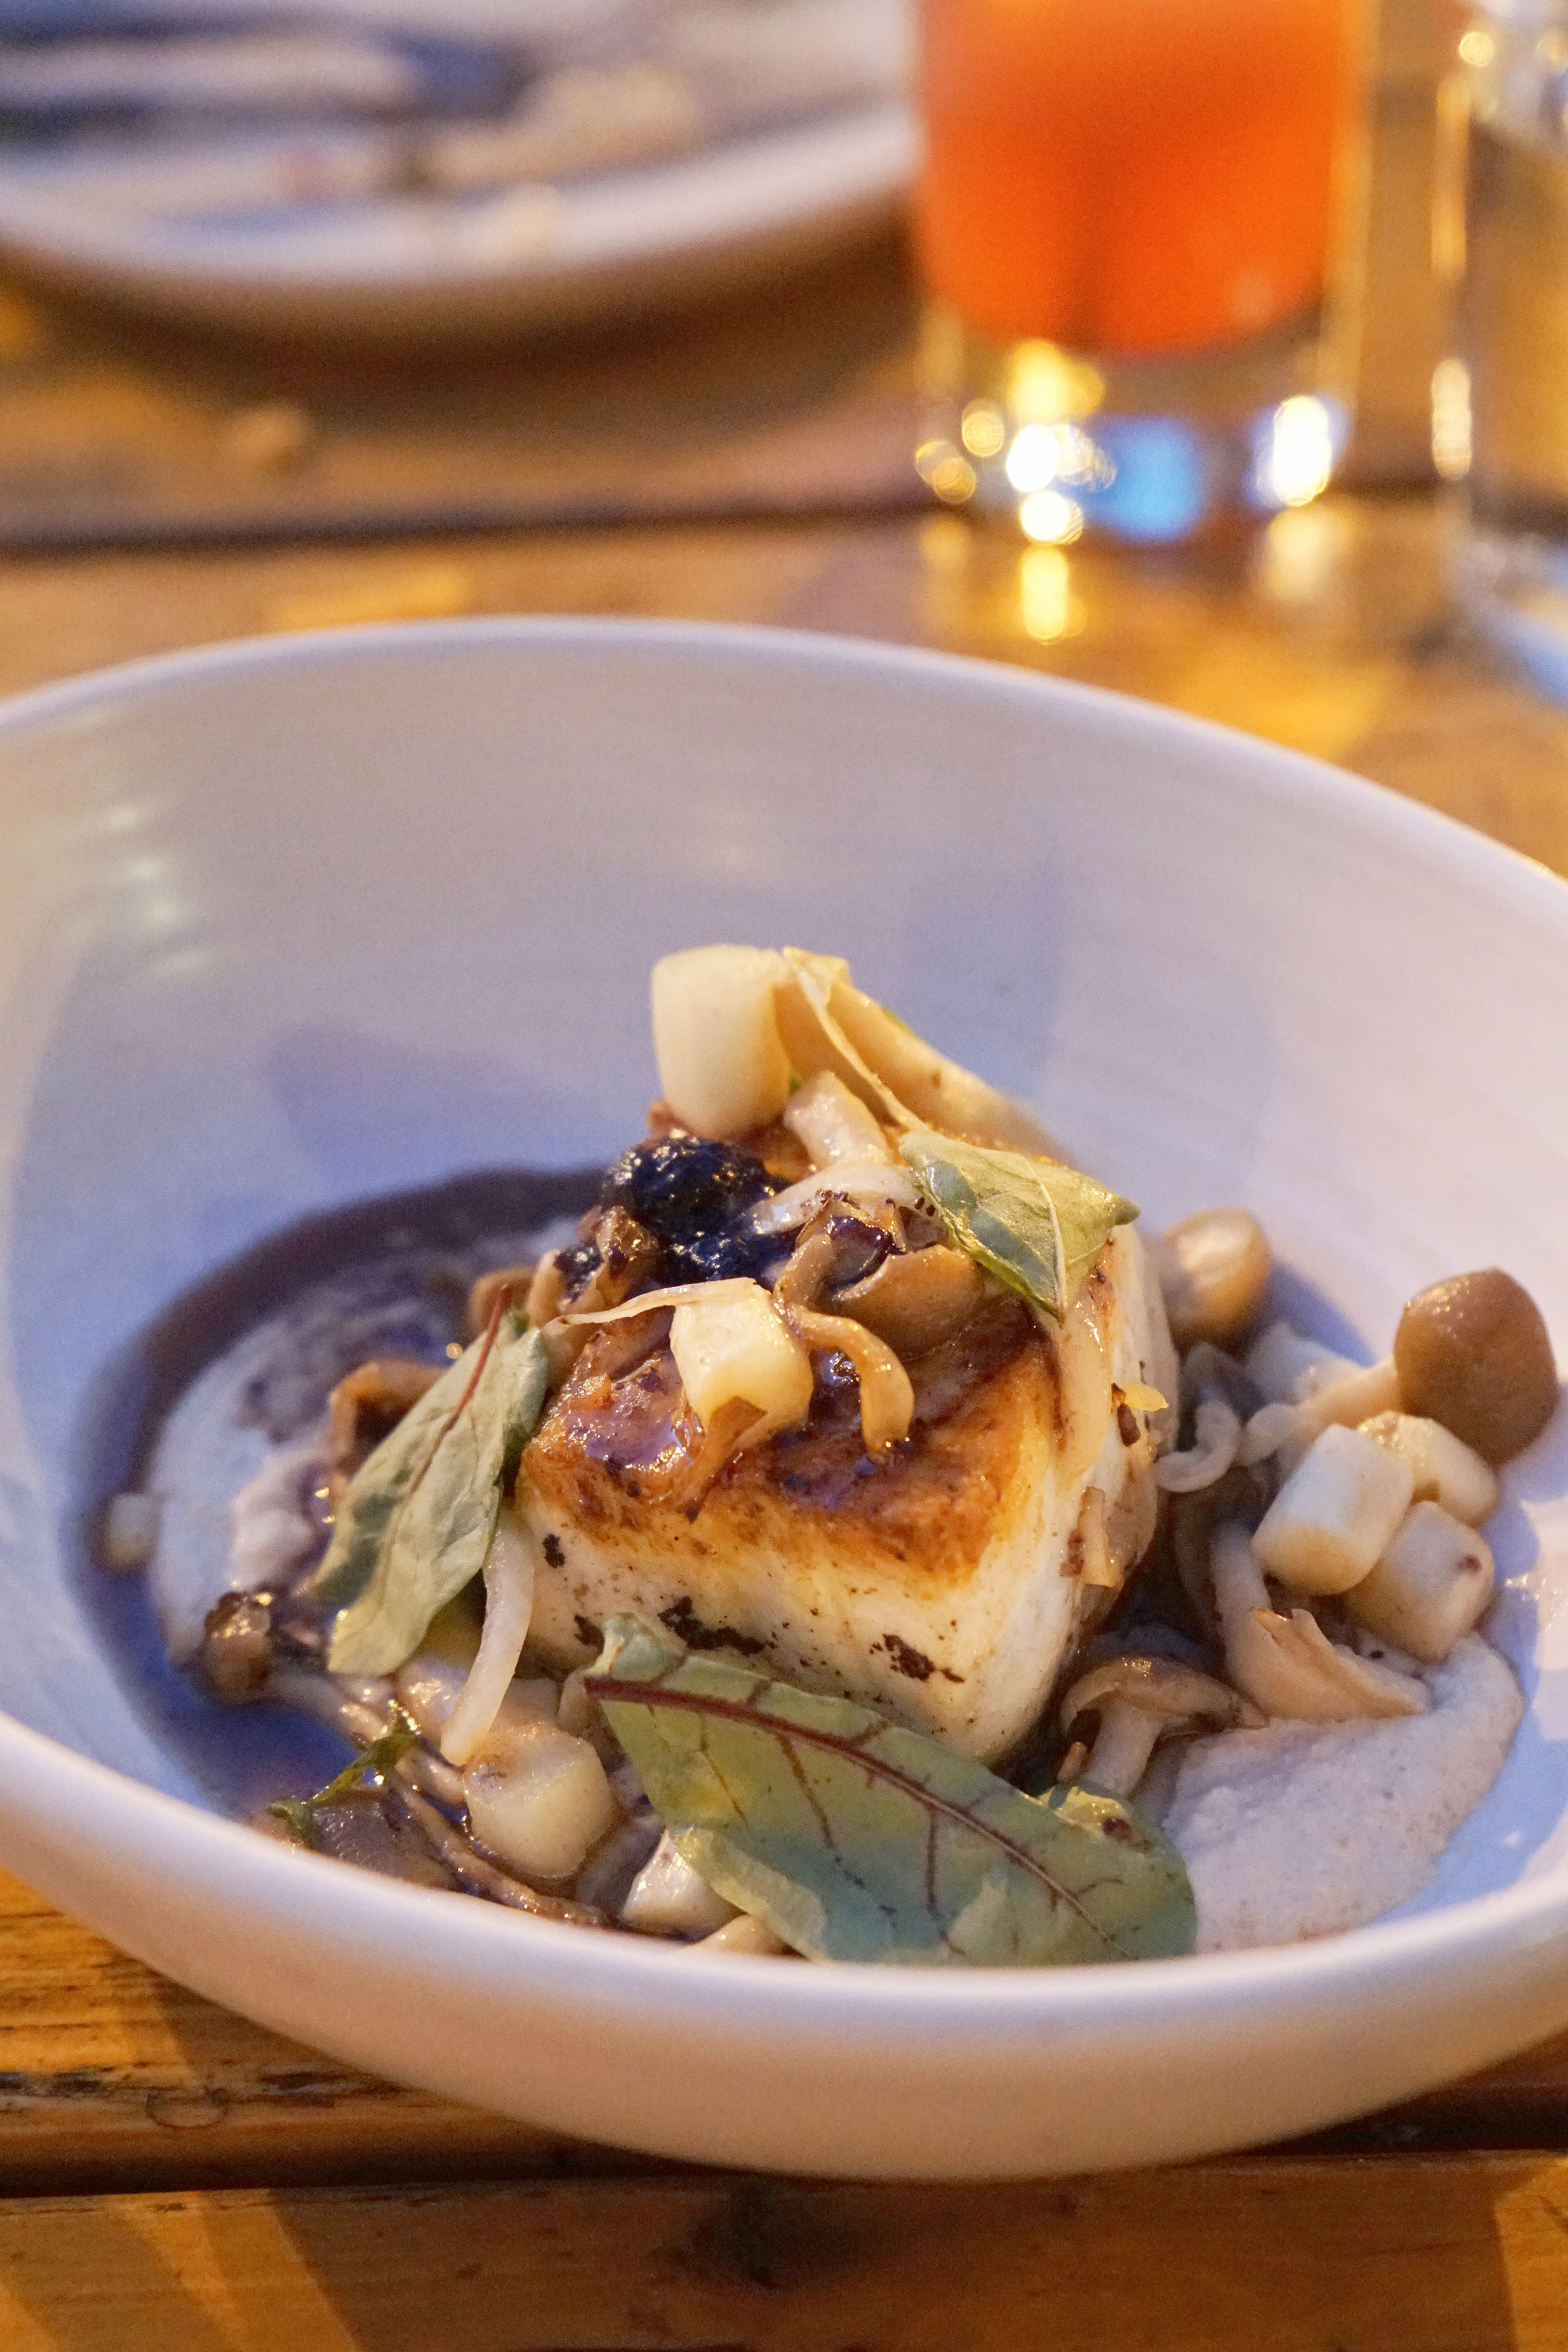 Pan Roasted Halibut at the Girl and The Goat in Chicago